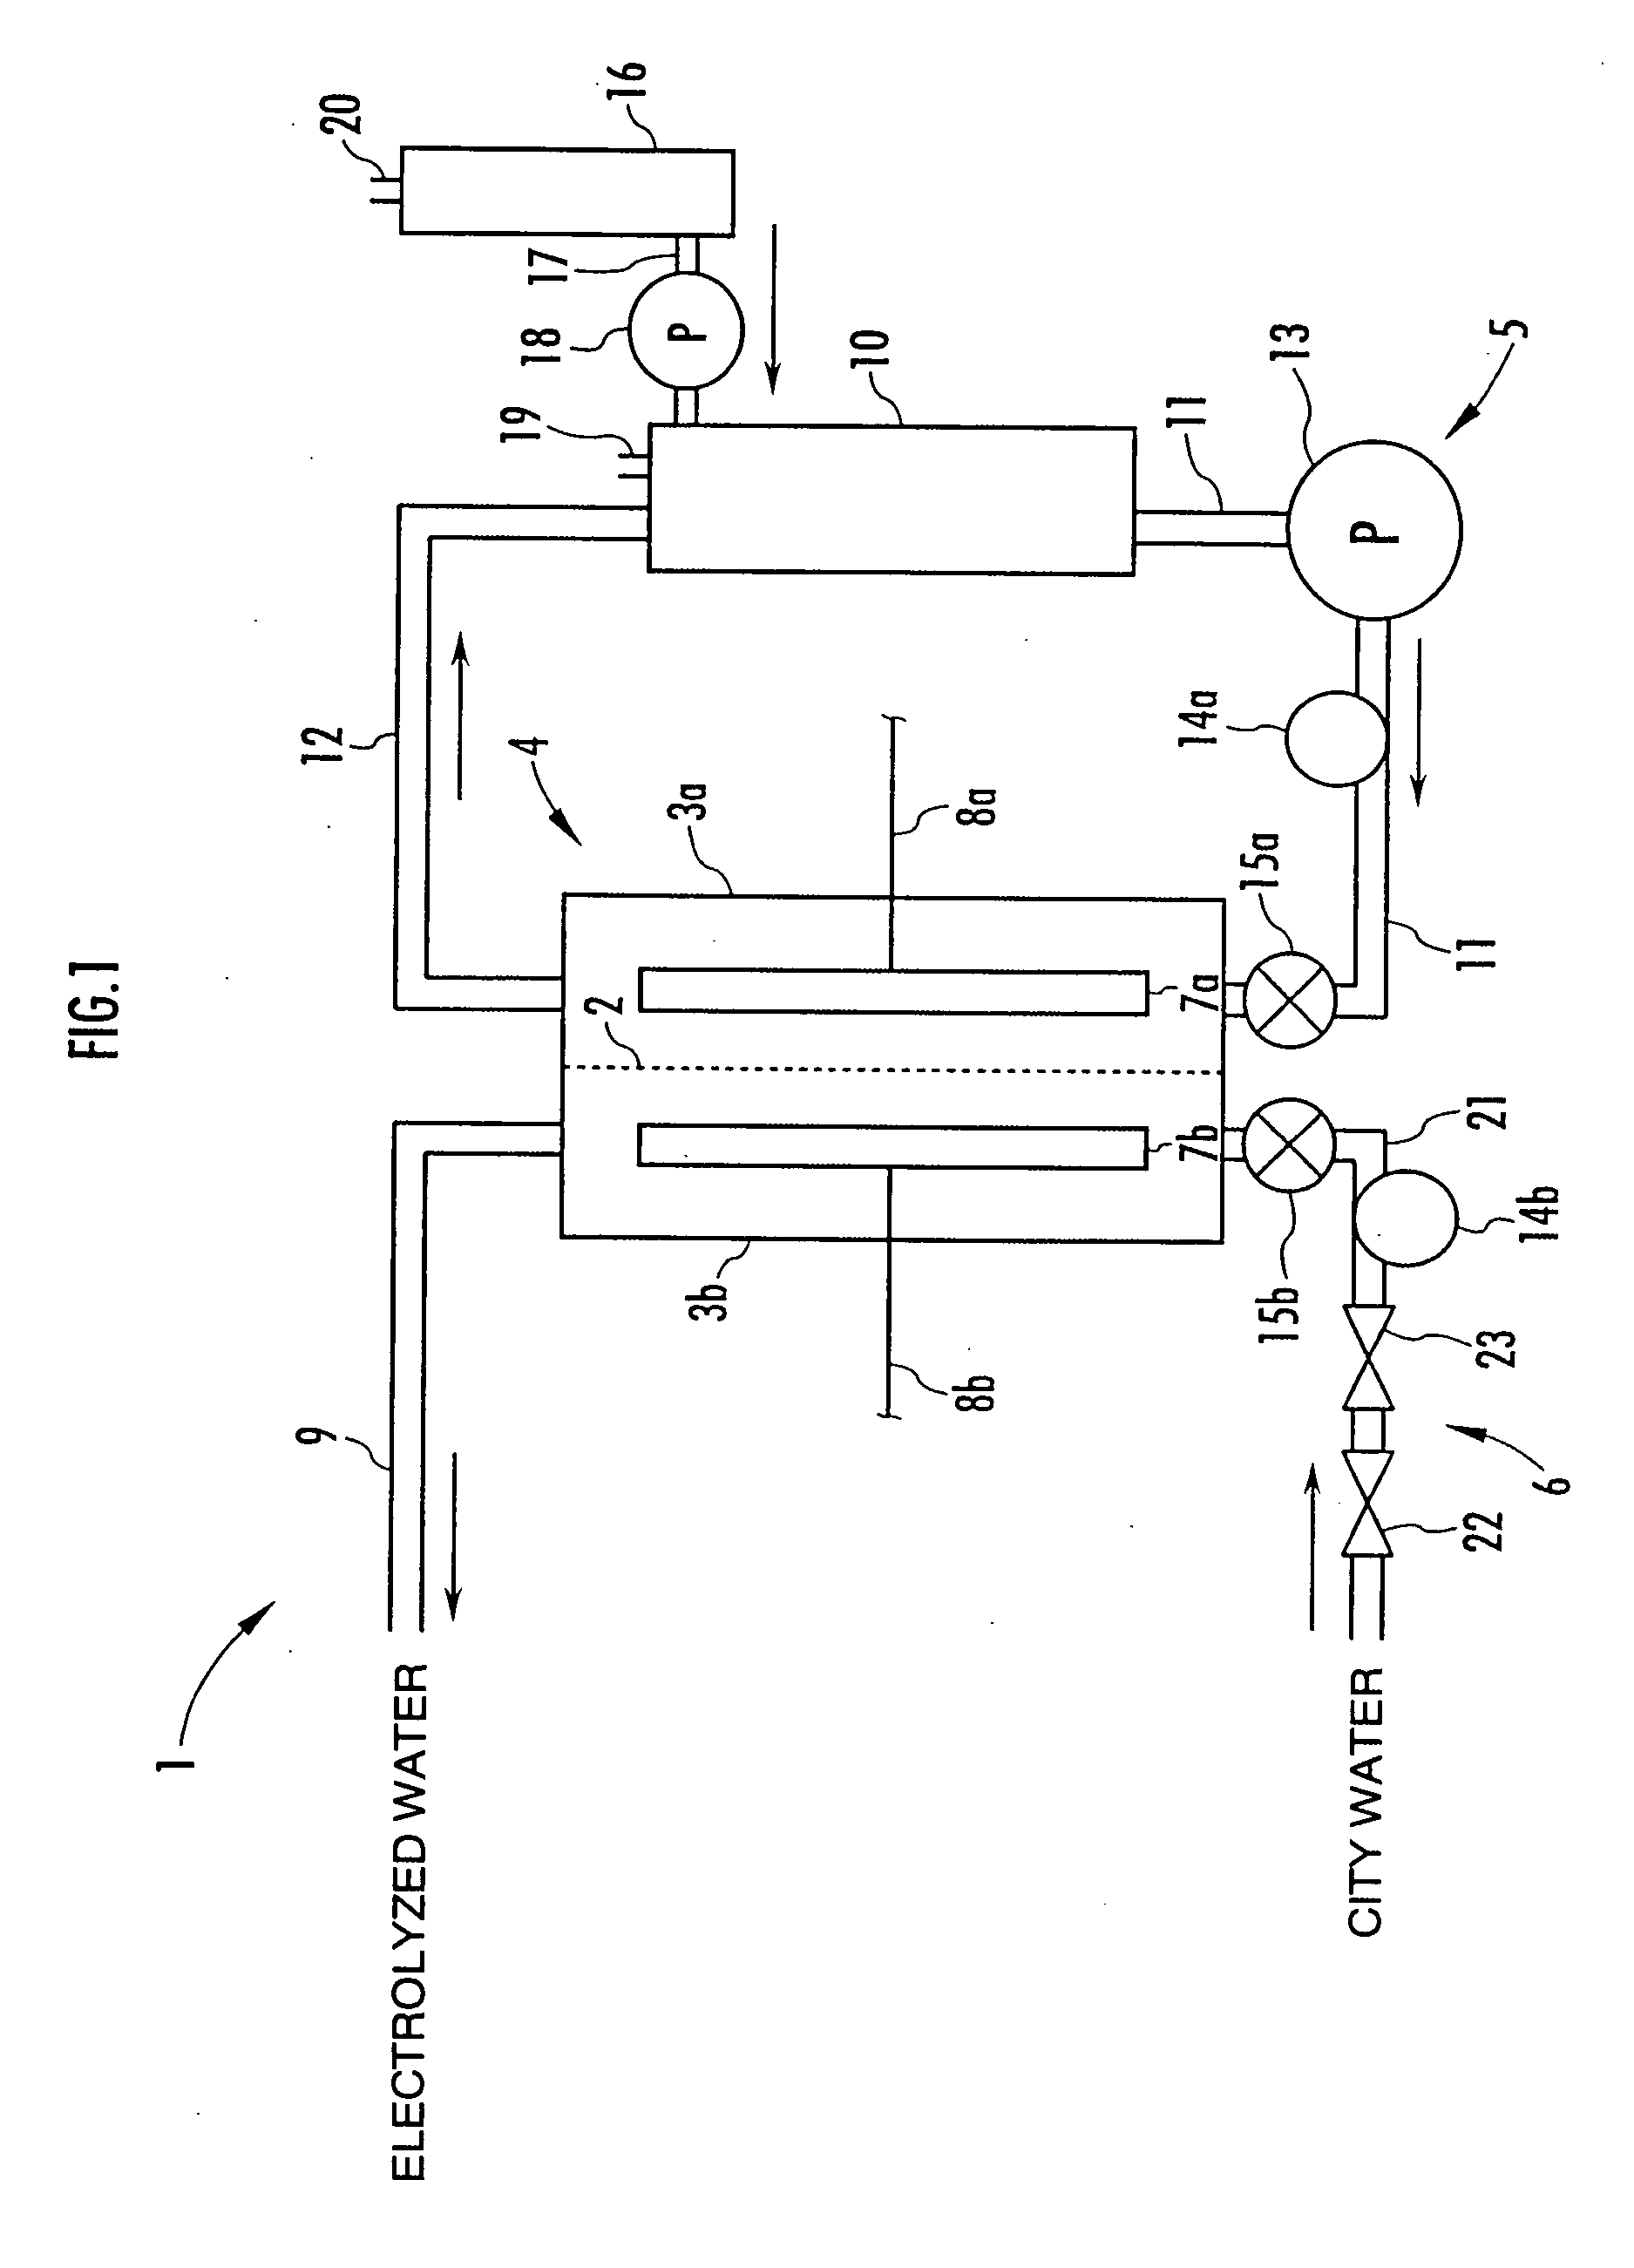 Method of generating electrolyzed water and electrolyzed water generation apparatus therefor